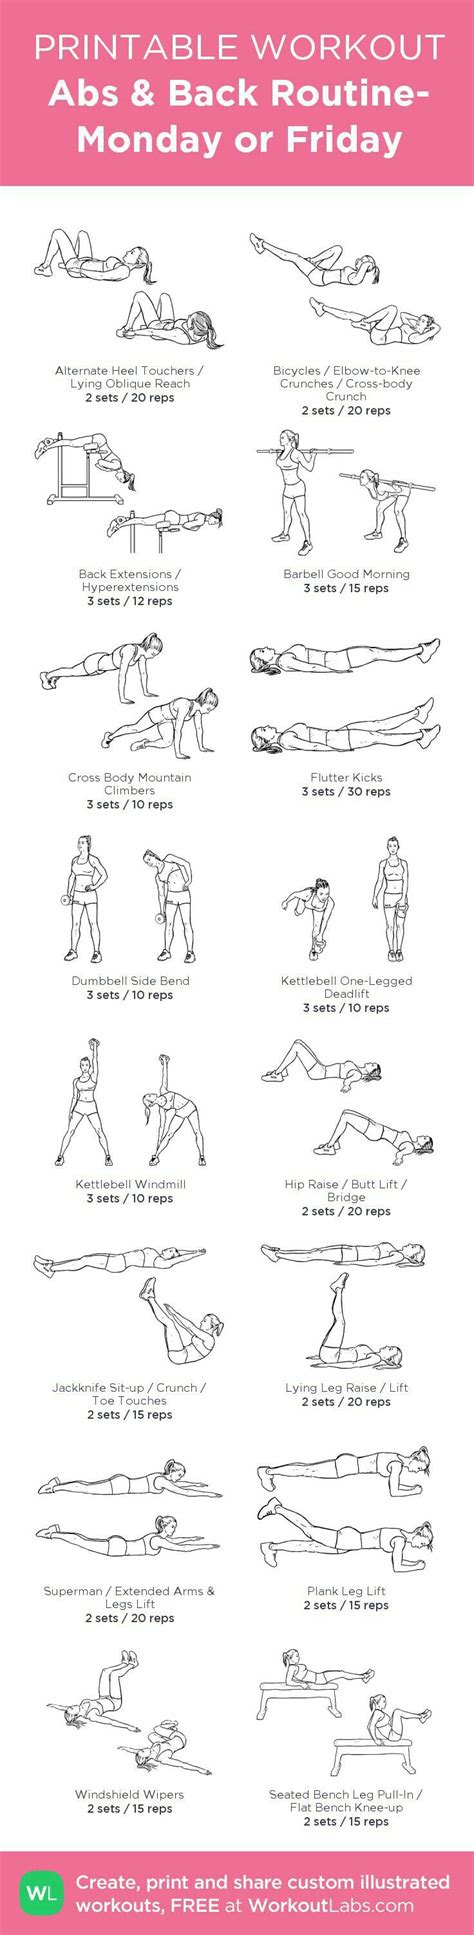 Monday And Friday Workout Friday Workout Back Routine